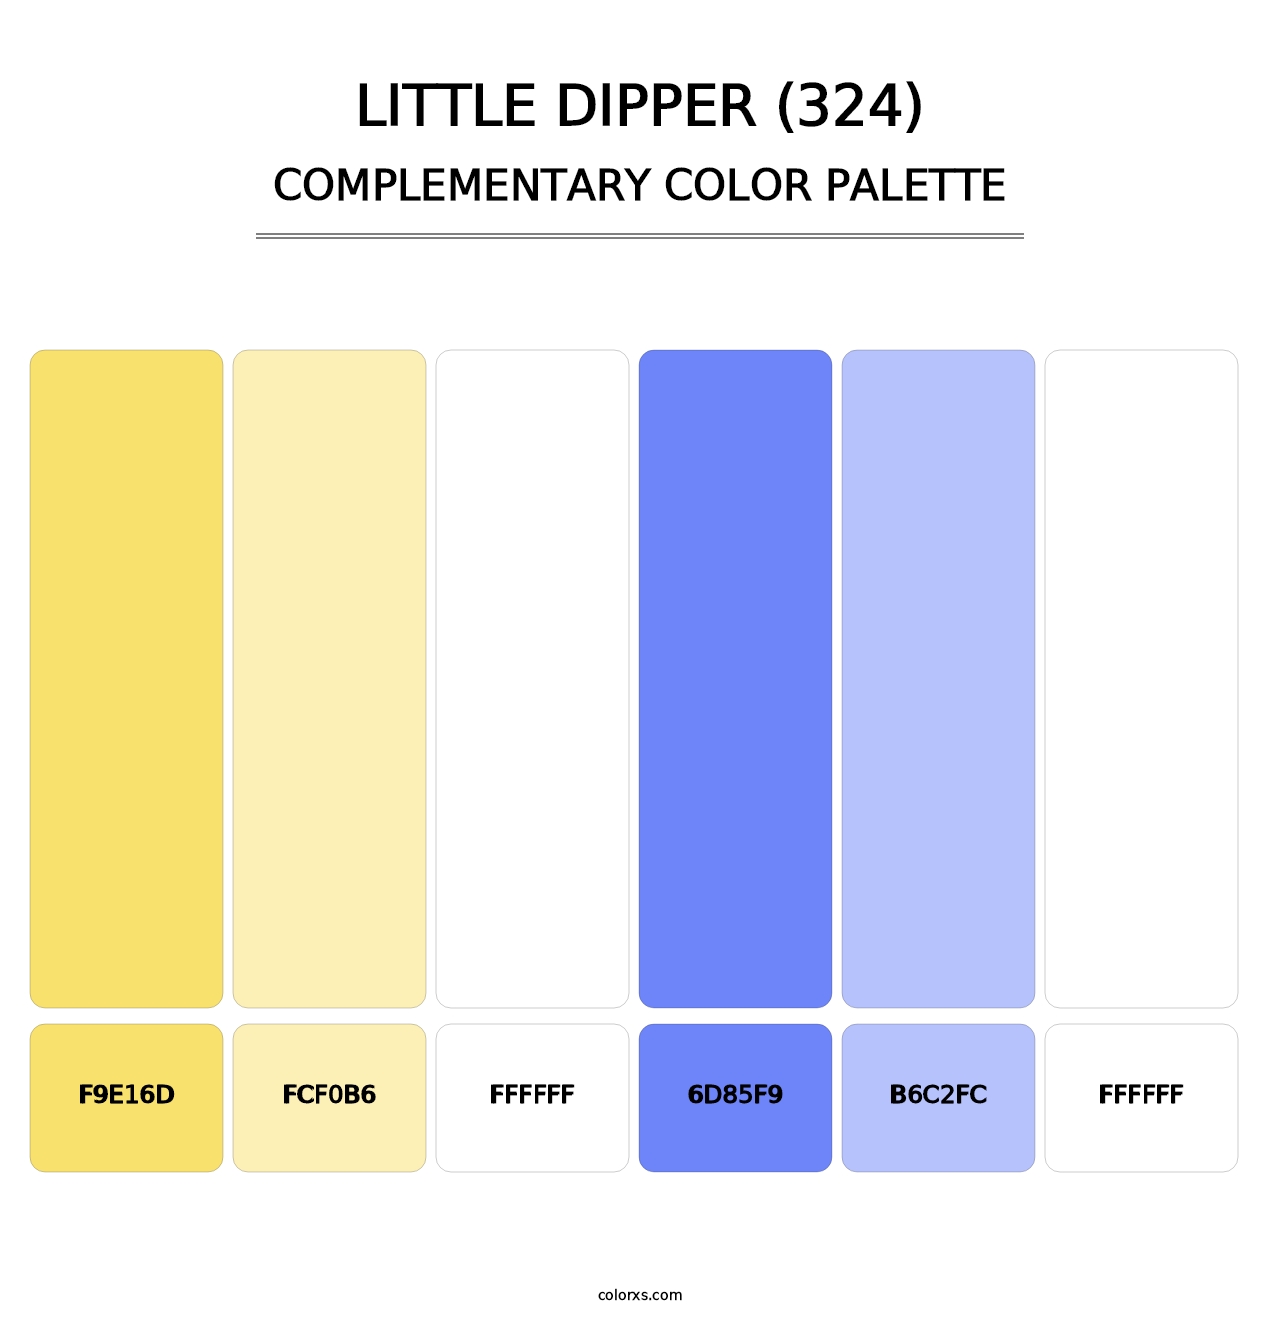 Little Dipper (324) - Complementary Color Palette